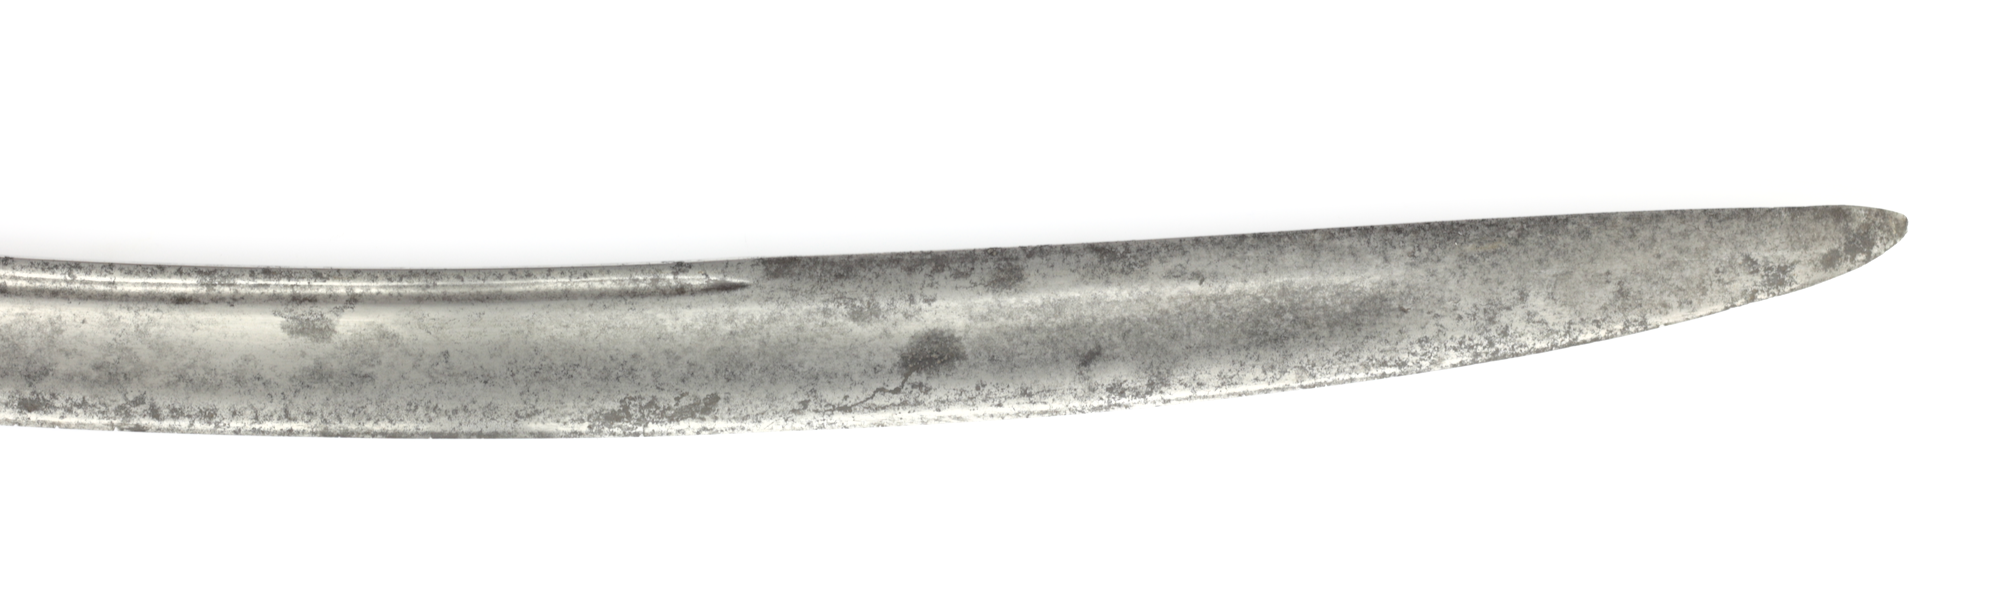 Talwar with southern style hilt